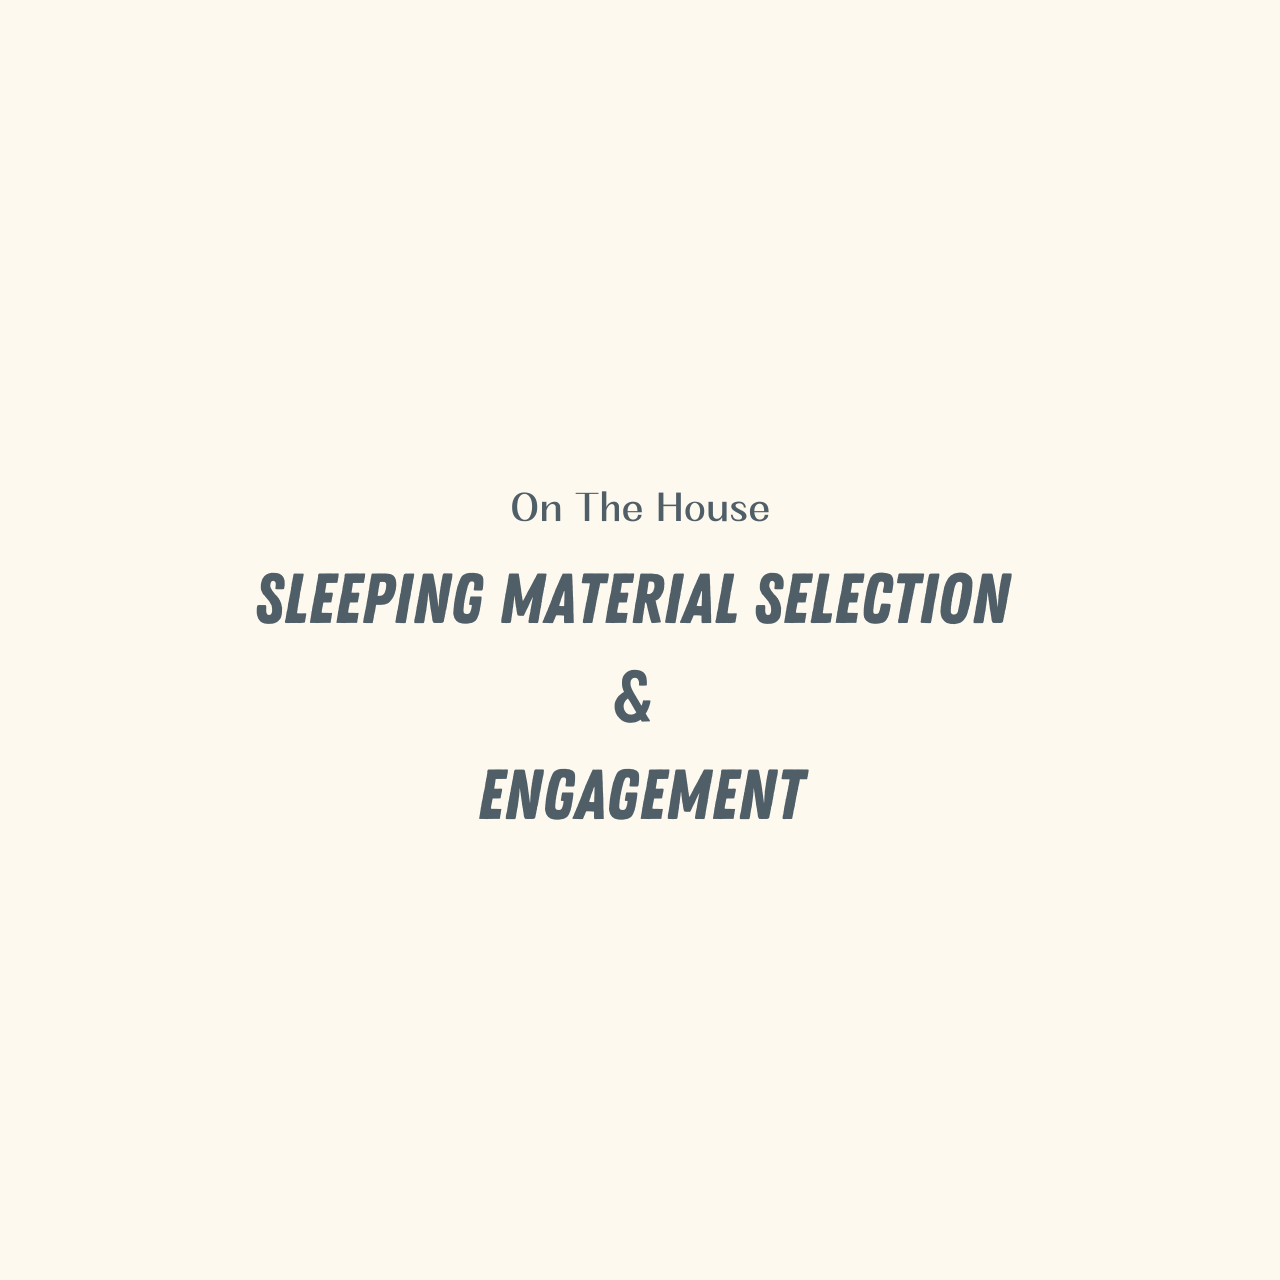 Sleeping Material Selection & Engagement